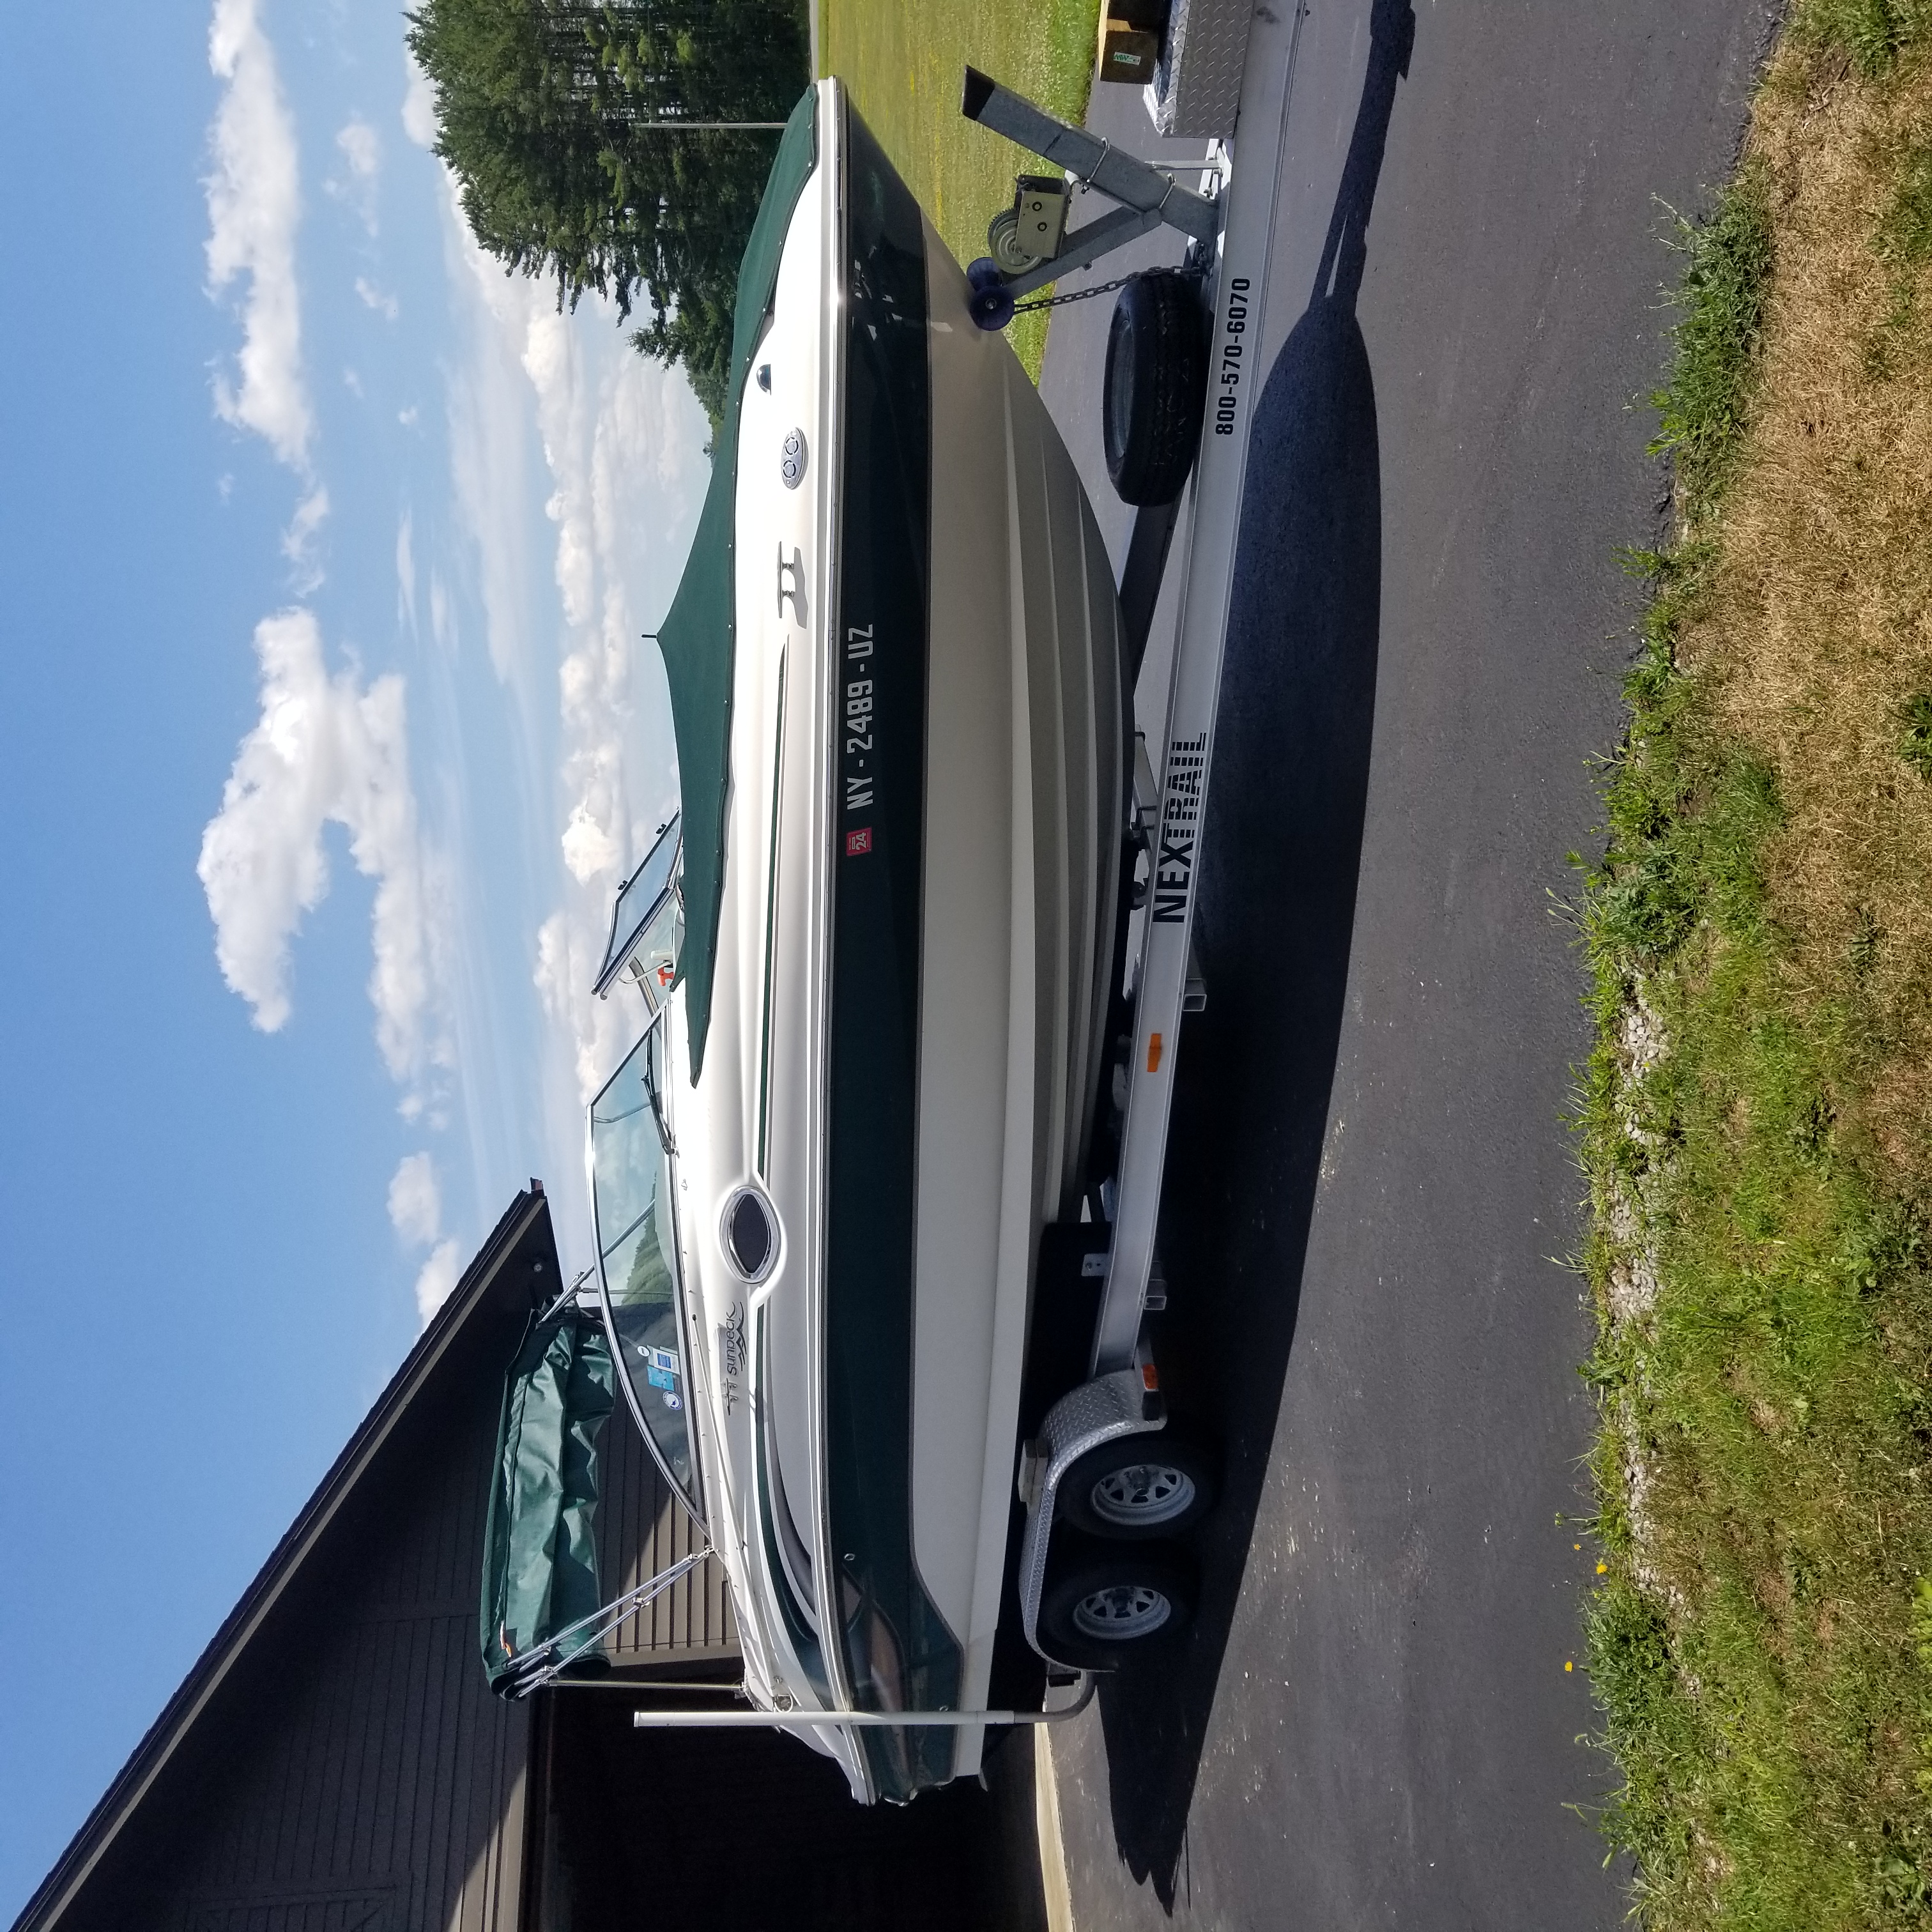 2003 Sea Ray 240 Sundeck Power boat for sale in Schoharie, NY - image 2 